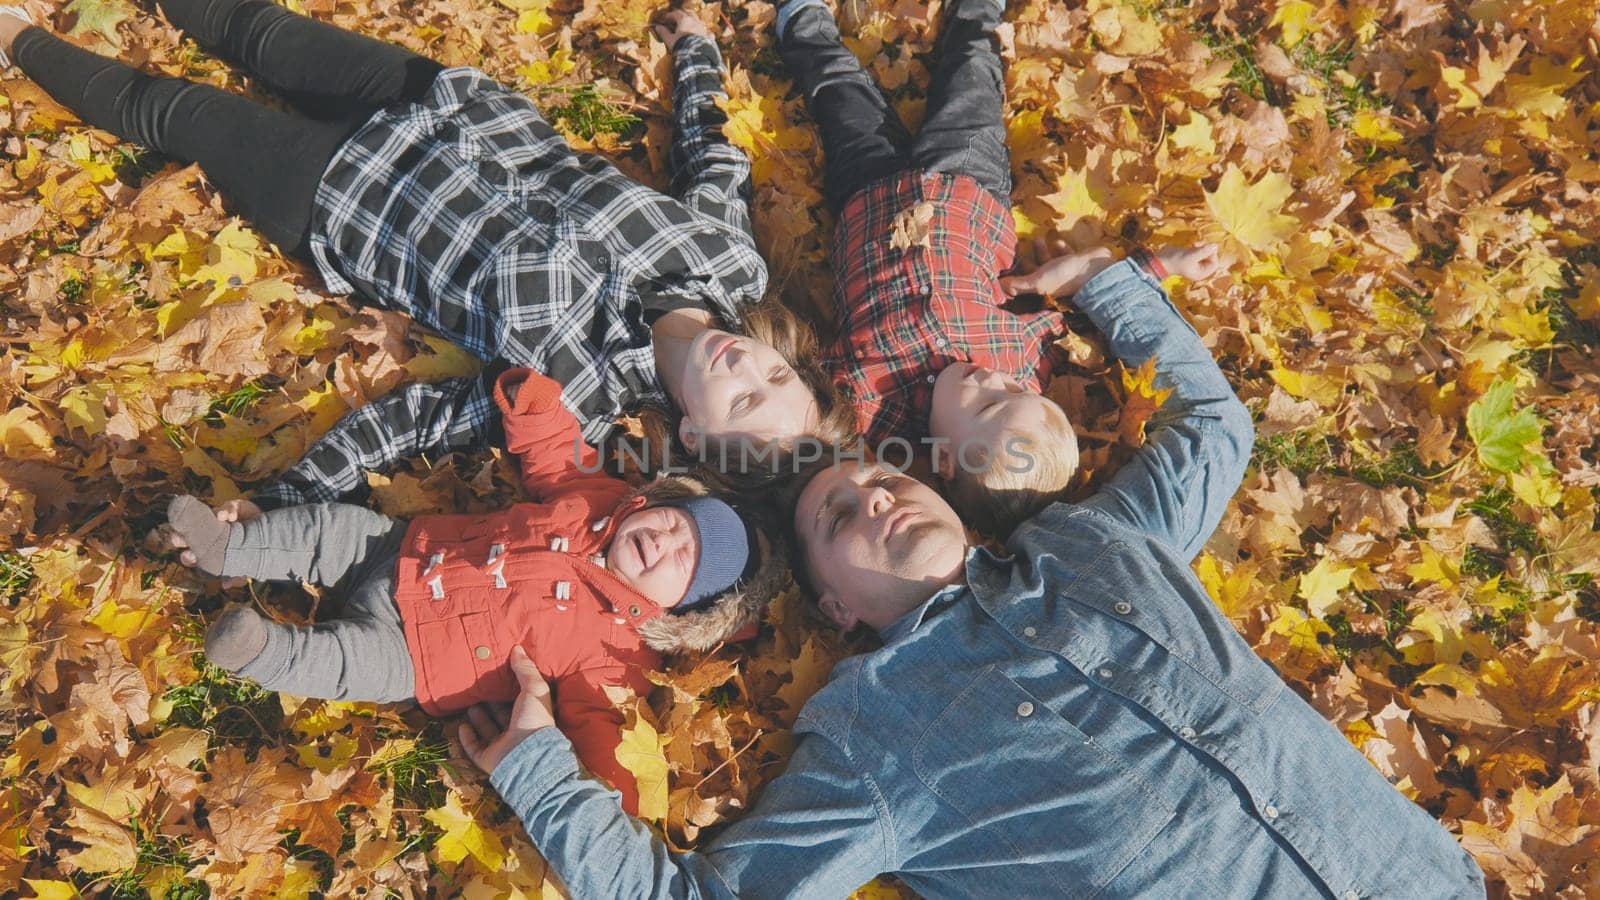 The happy family lies on their backs in the autumn leaves